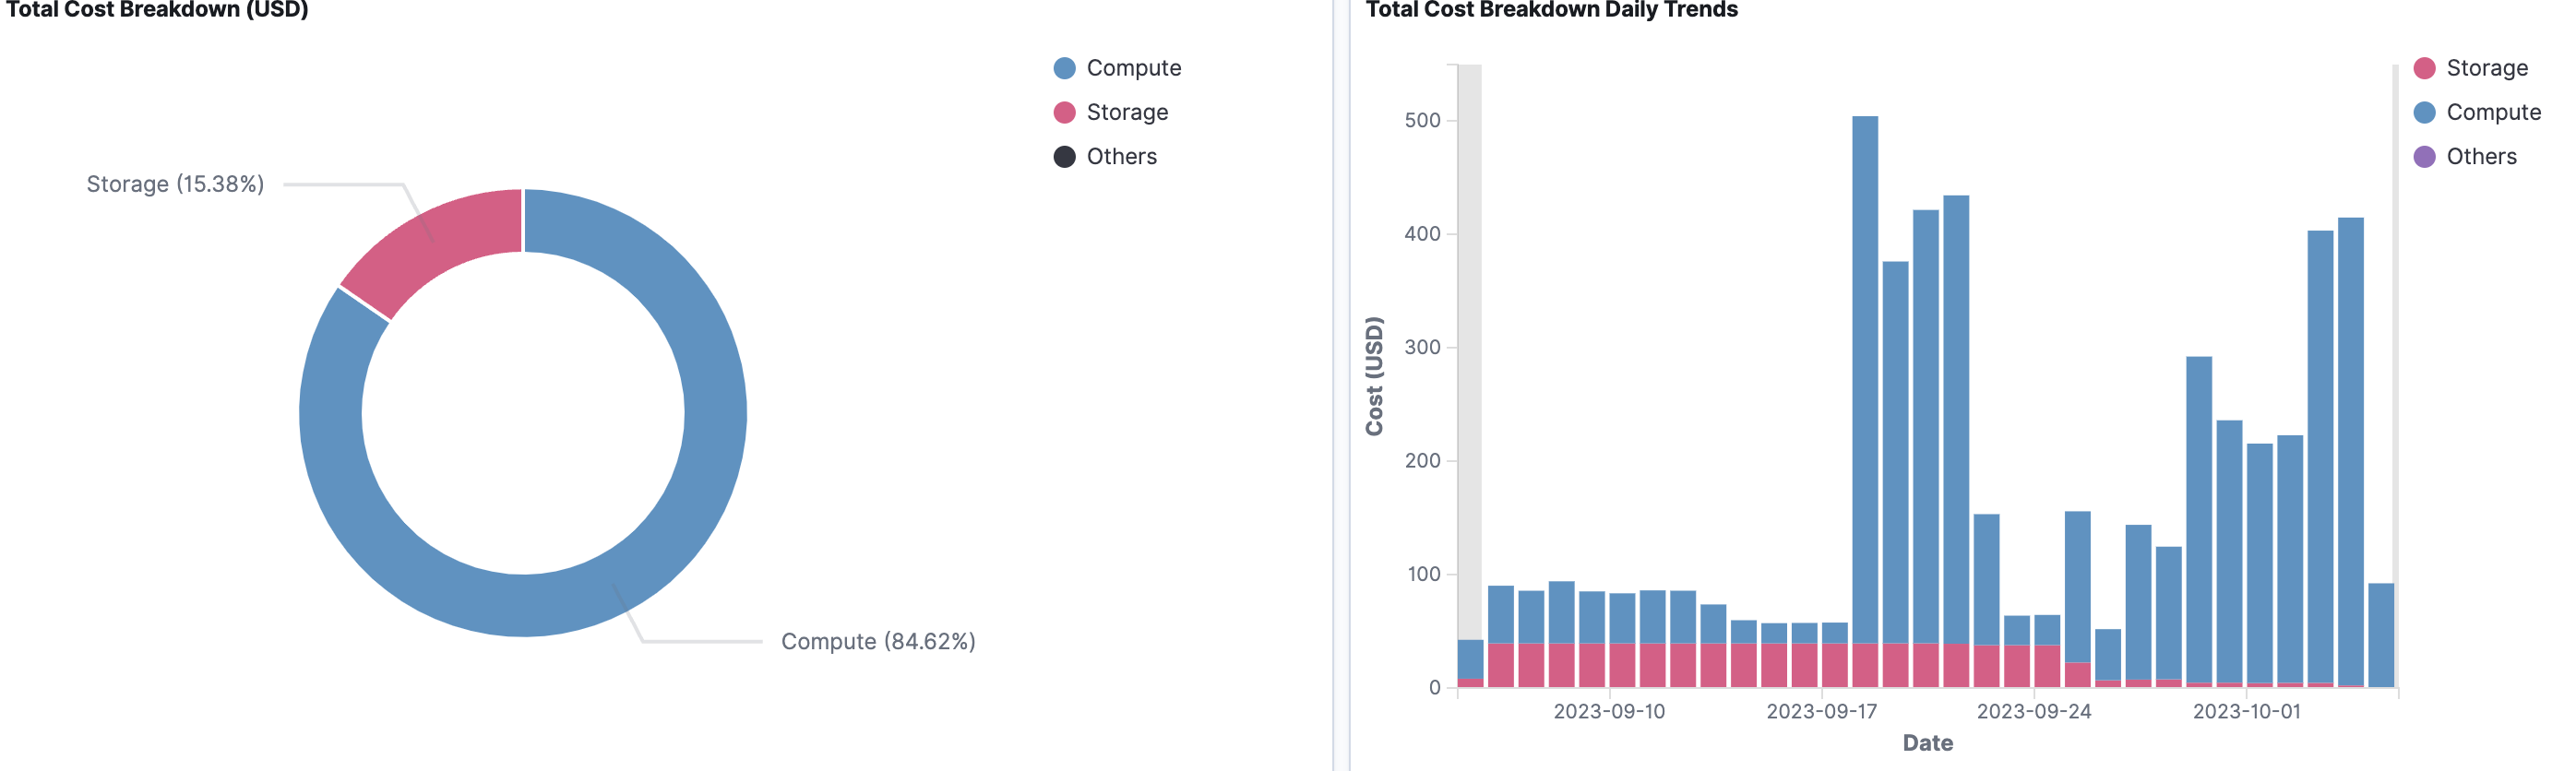 bigquery-total-service-cost-breakdown-trend.png